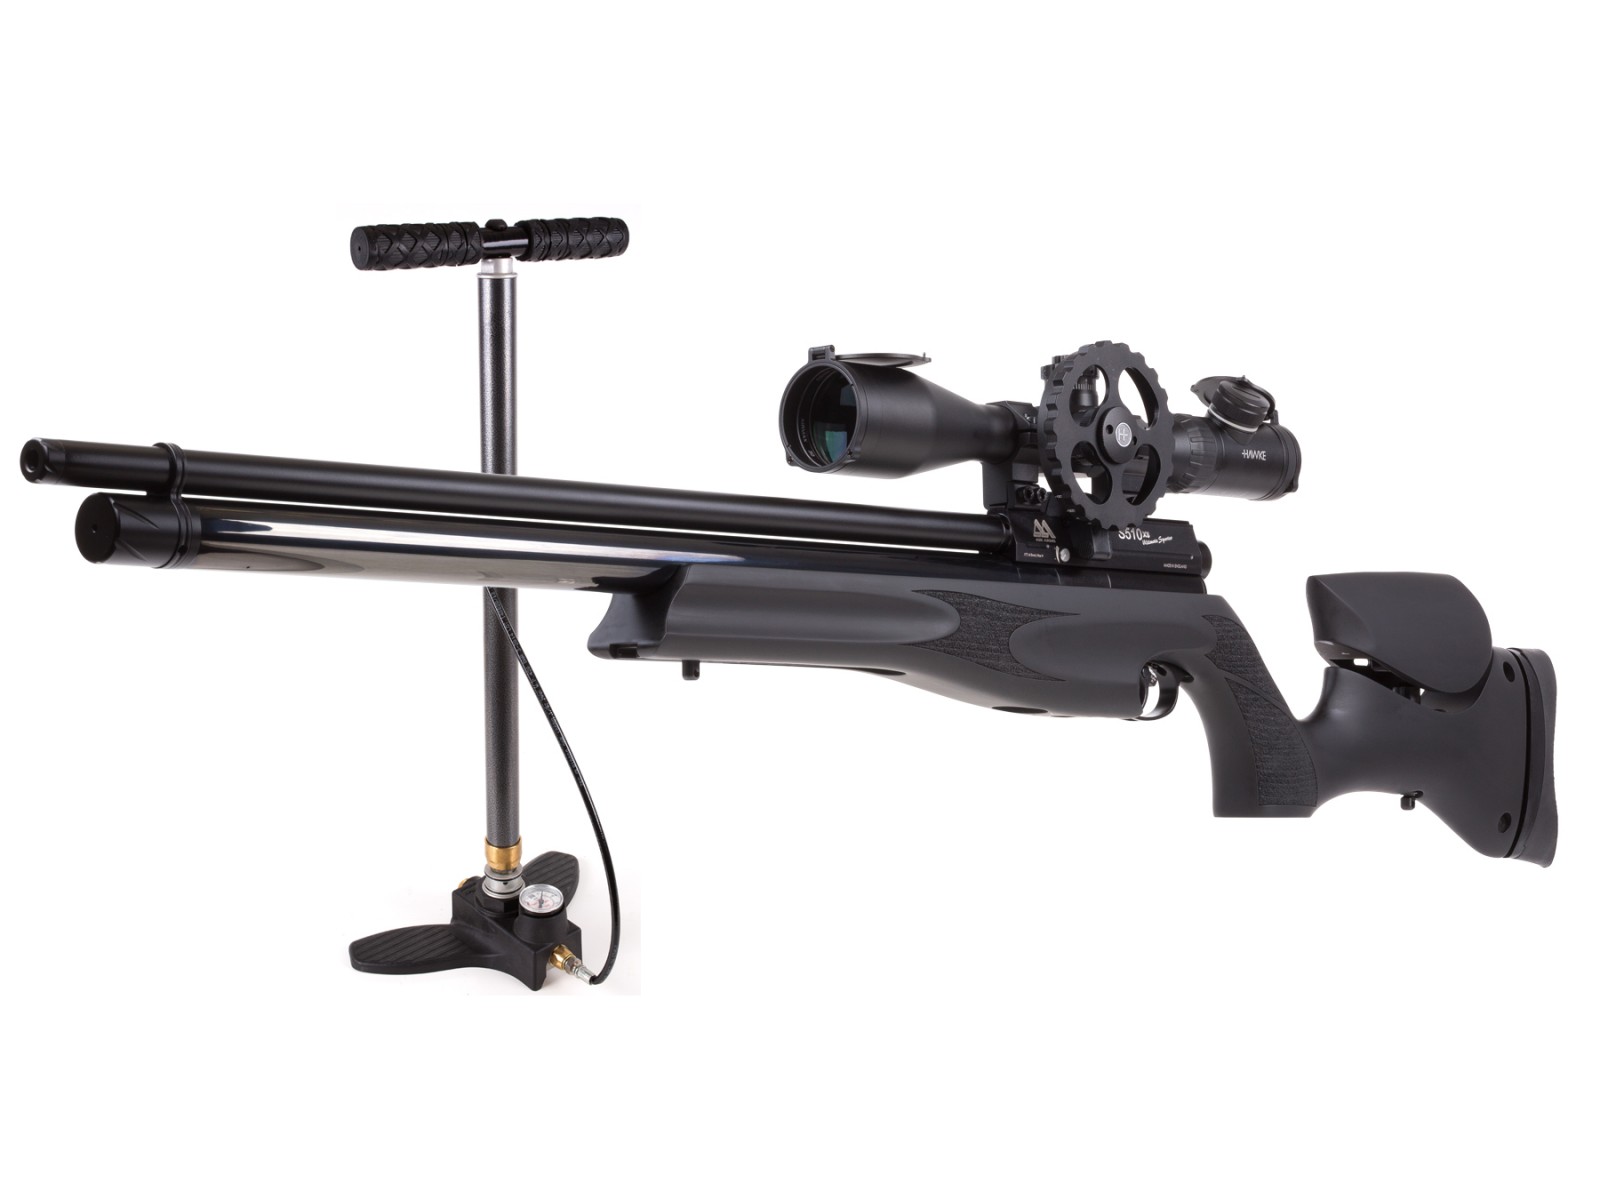 Air Arms S510 XS Ultimate Sporter, Black Soft Touch Pump Kit